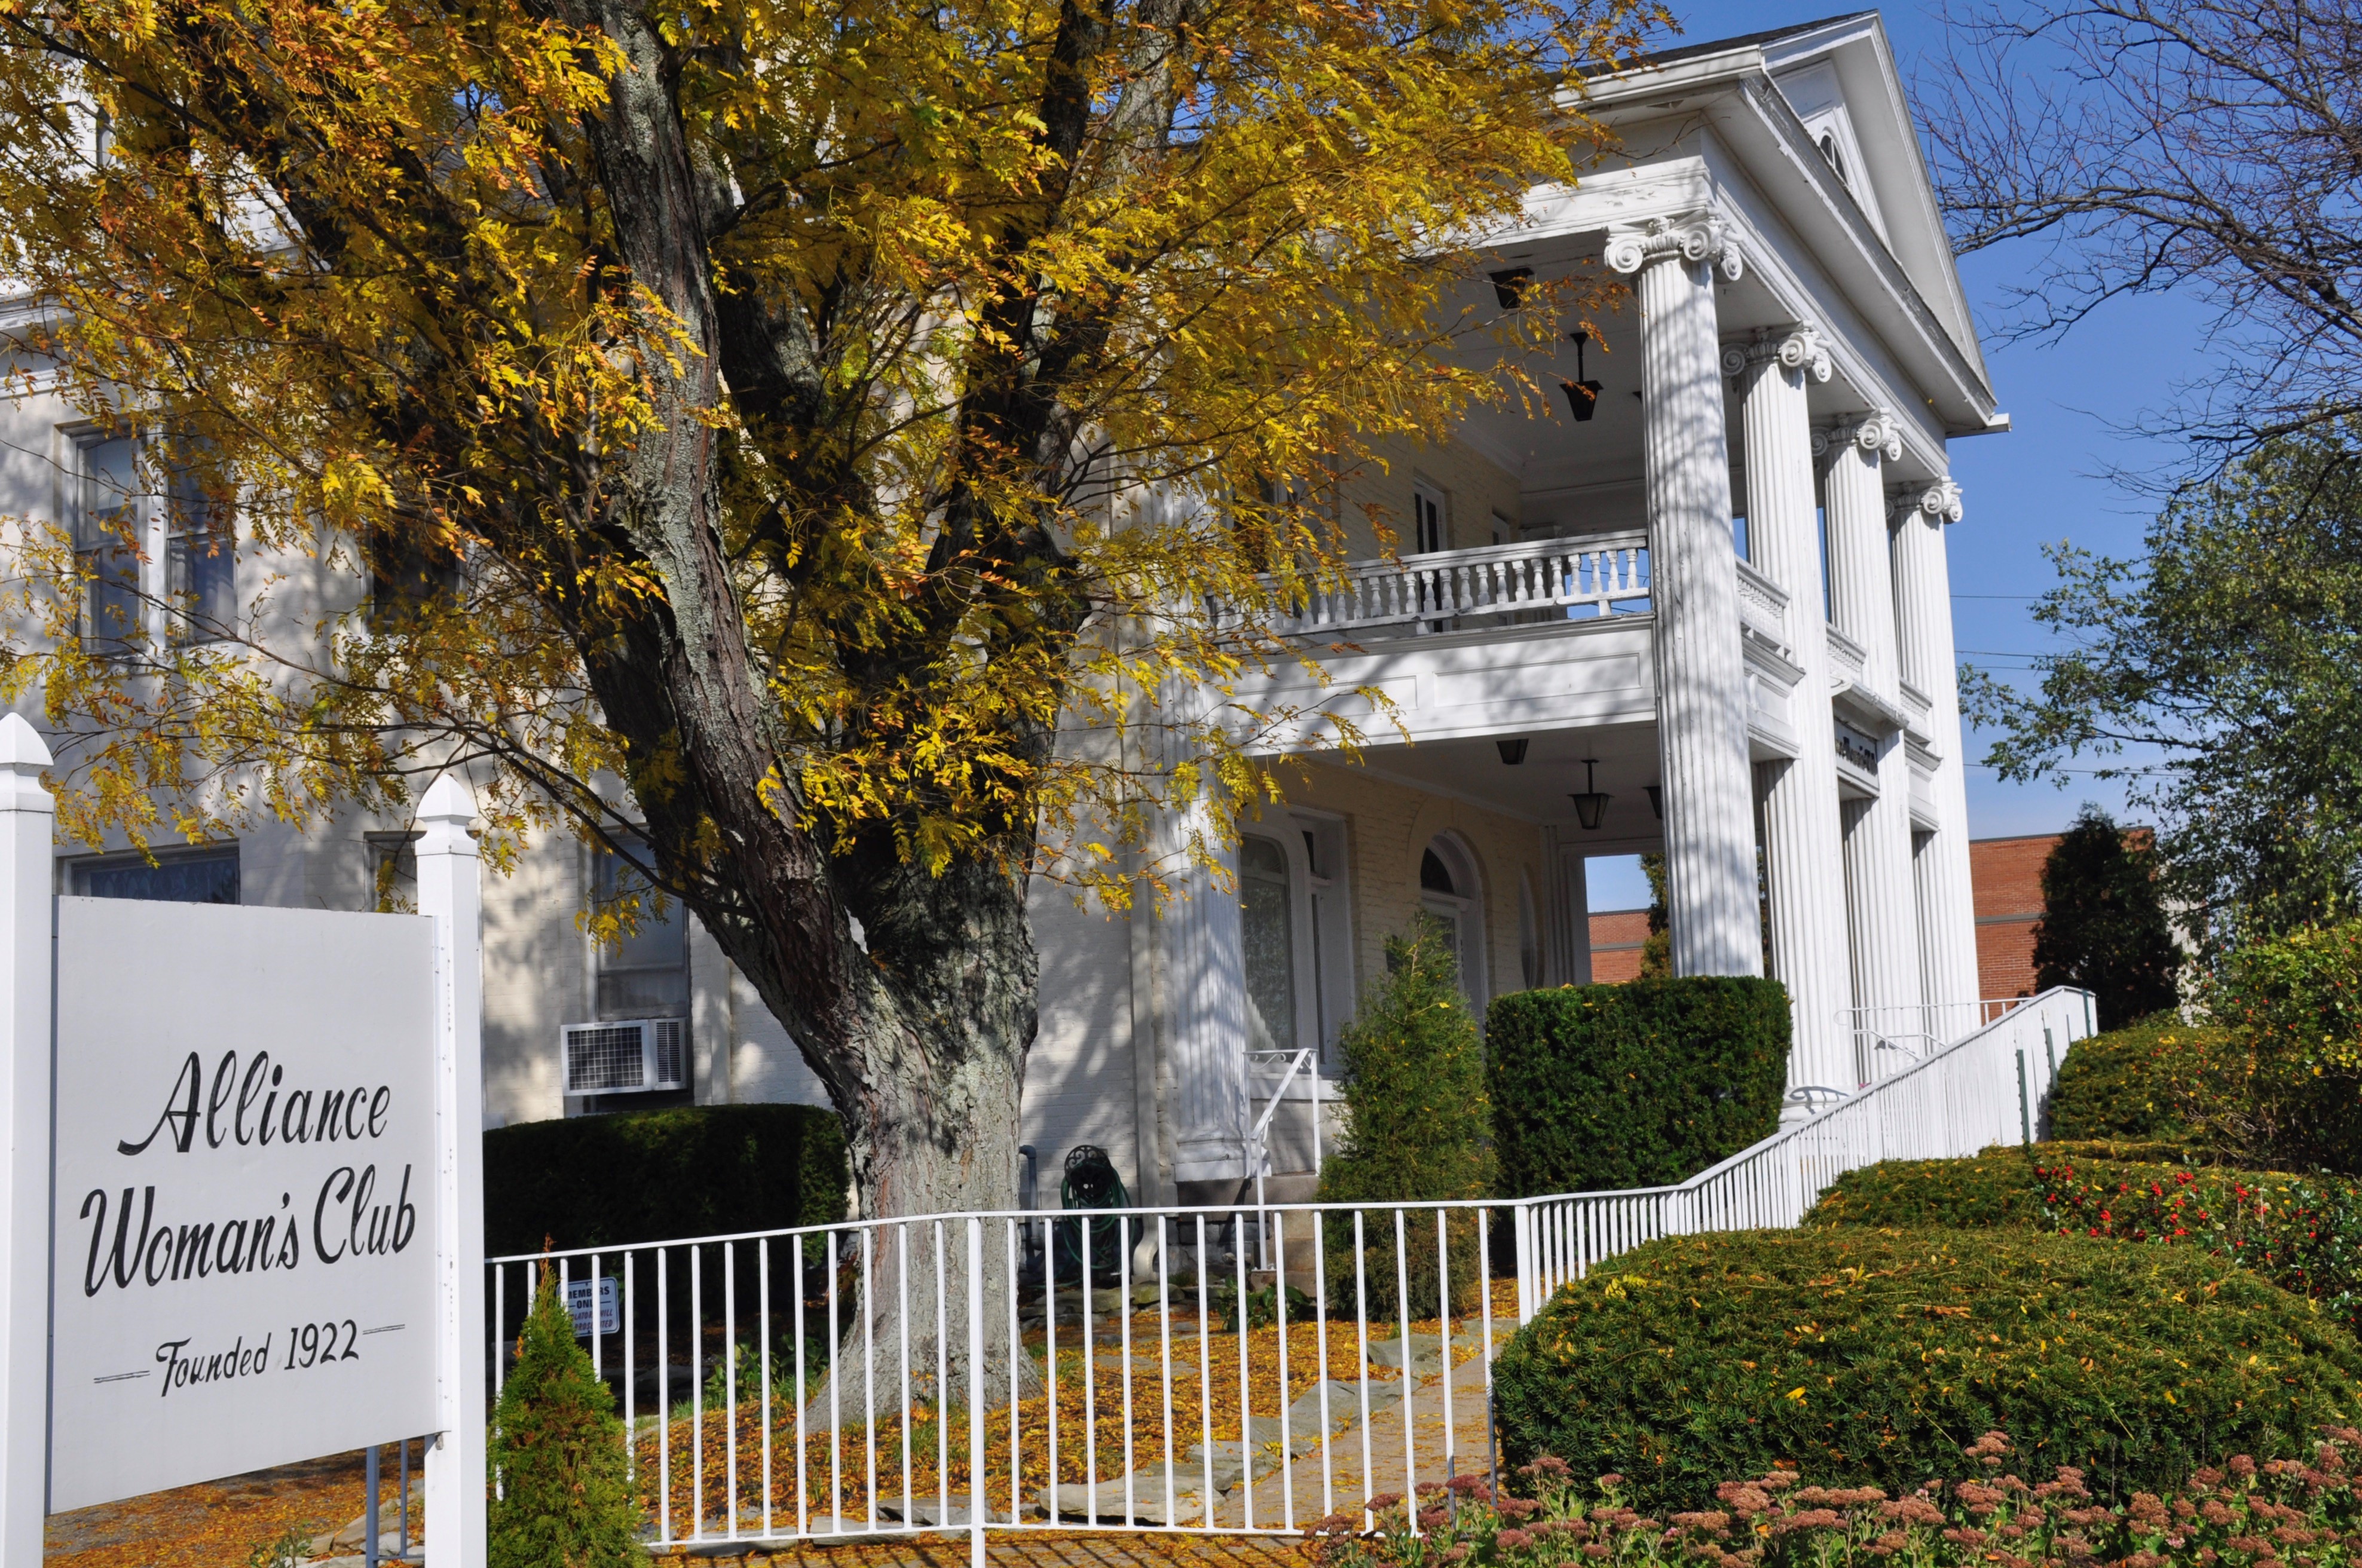 White colonial building with pillars of the Alliance Woman's Club, founded in 1922, amidst autumn foliage.